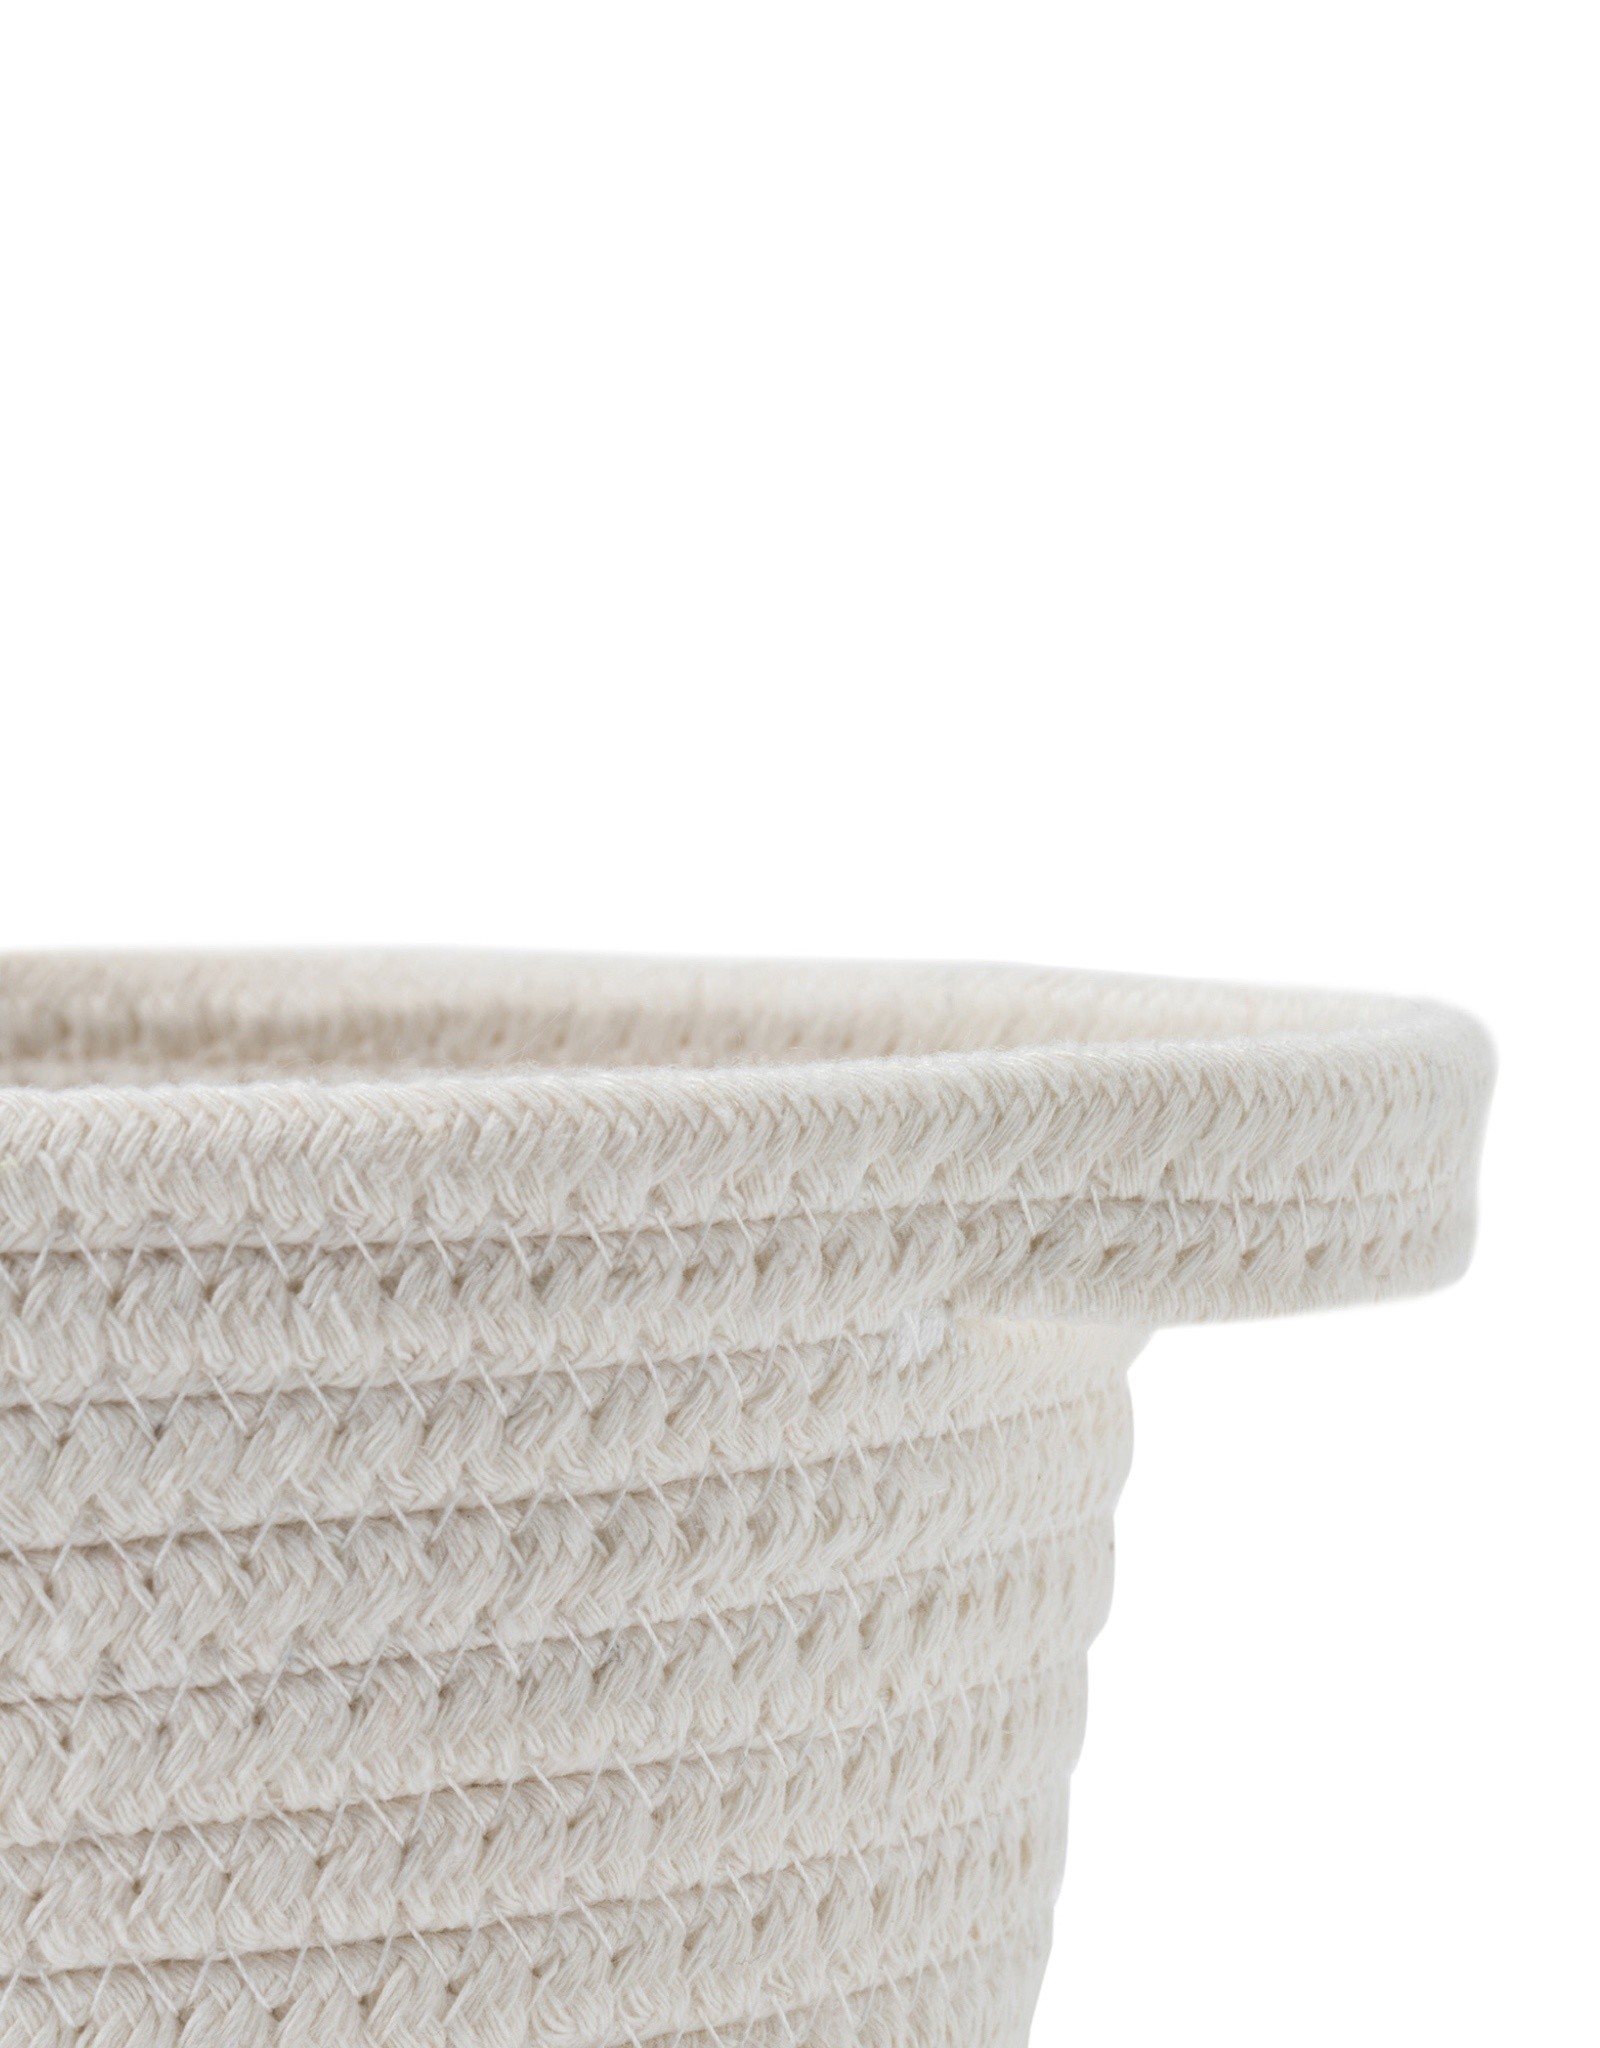 Cathay Basket Cathay Grey Cotton Rope Oval 14.5” L 10-2545